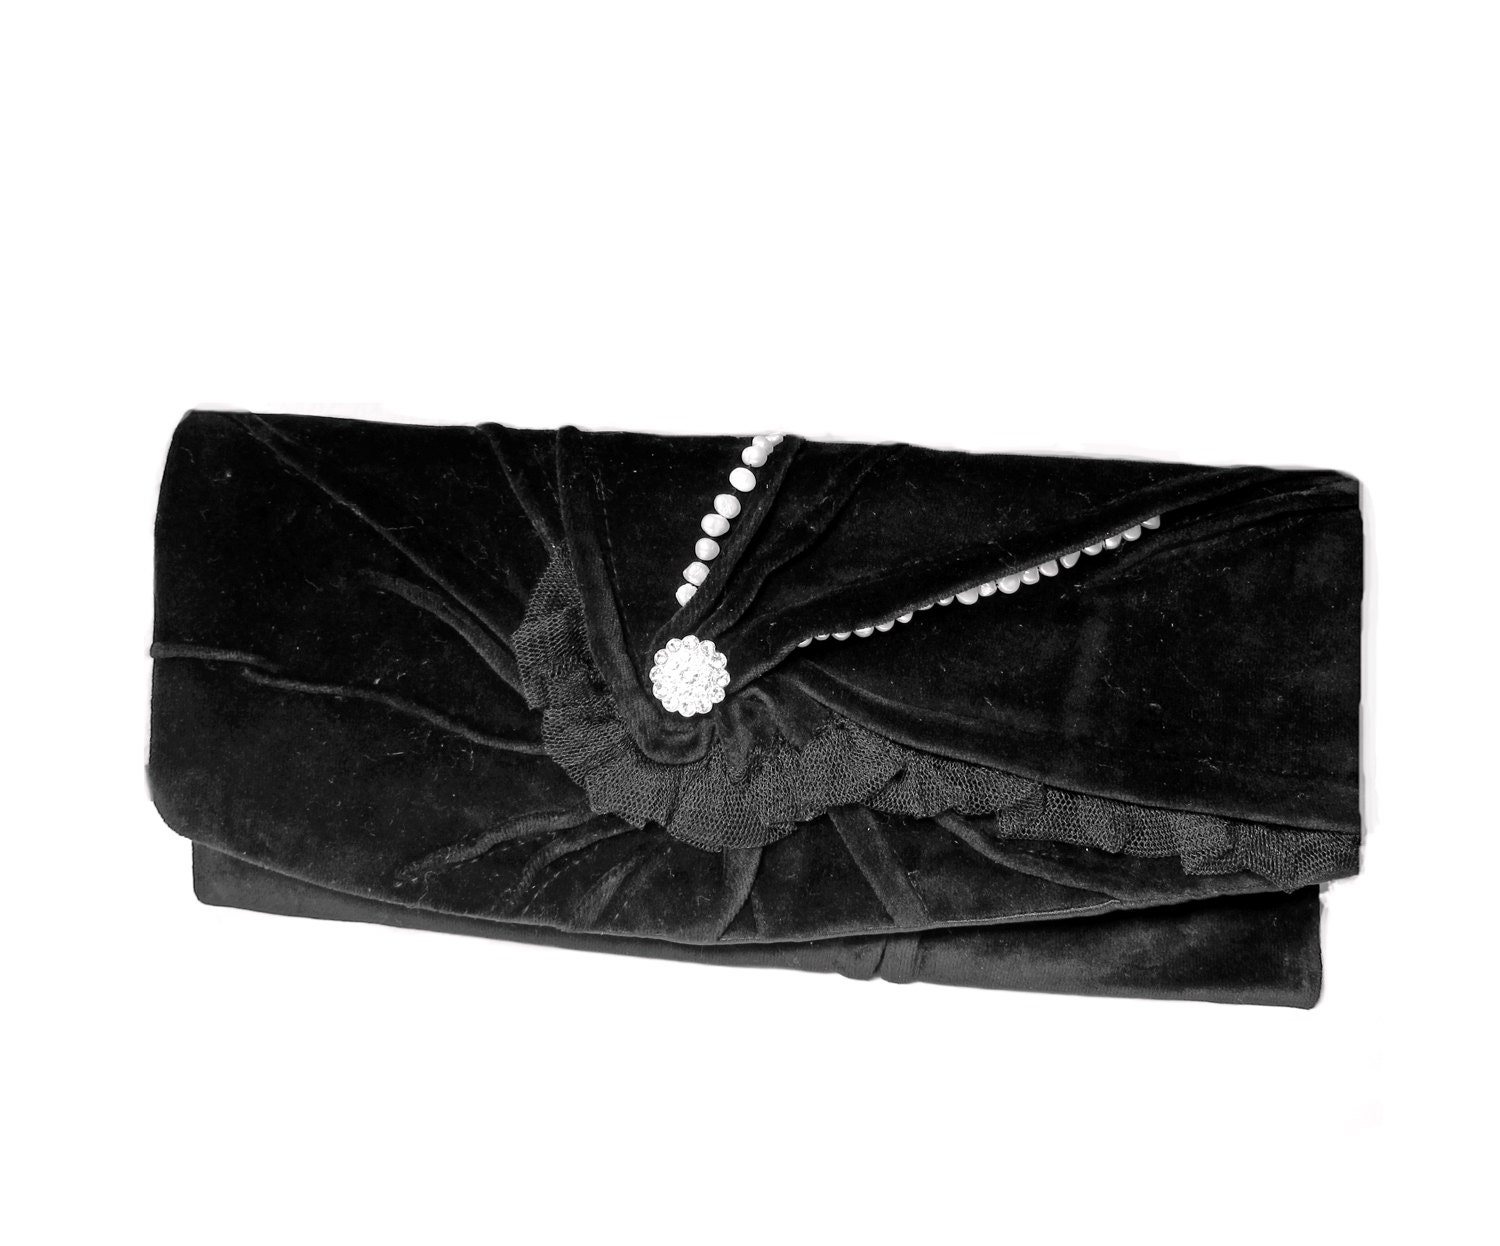 Preorder  Love - Black Clutch Bag in French Plush Velvet and Satin with Swarovski Crystals and Real Pearls - MariesCorner